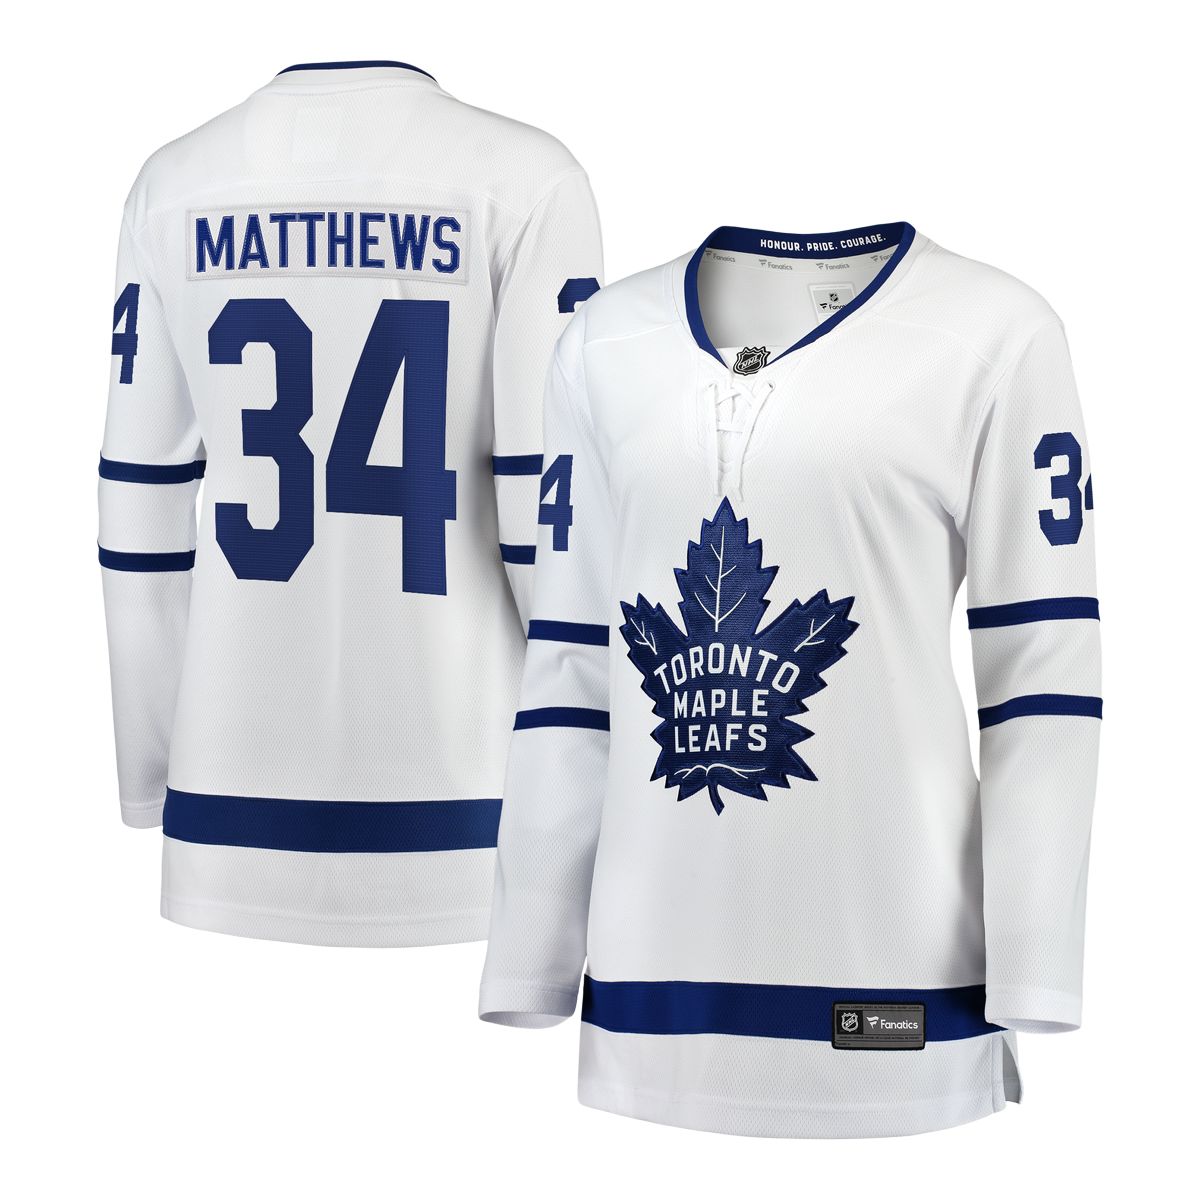 Maple leafs X Drew shirt, hoodie, sweater, long sleeve and tank top